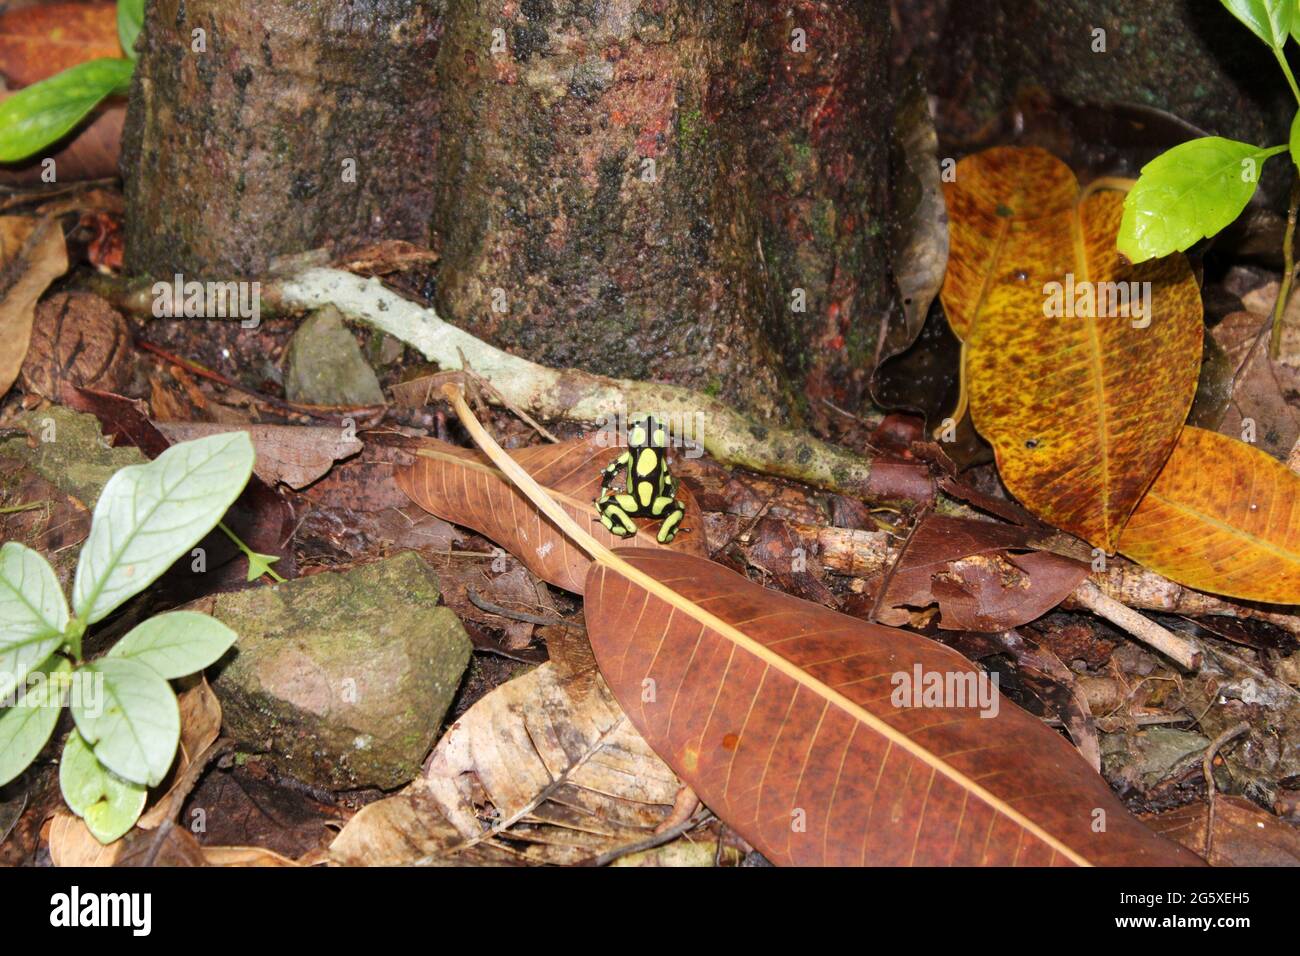 endemic poisonous frog of southwestern colombia. Stock Photo